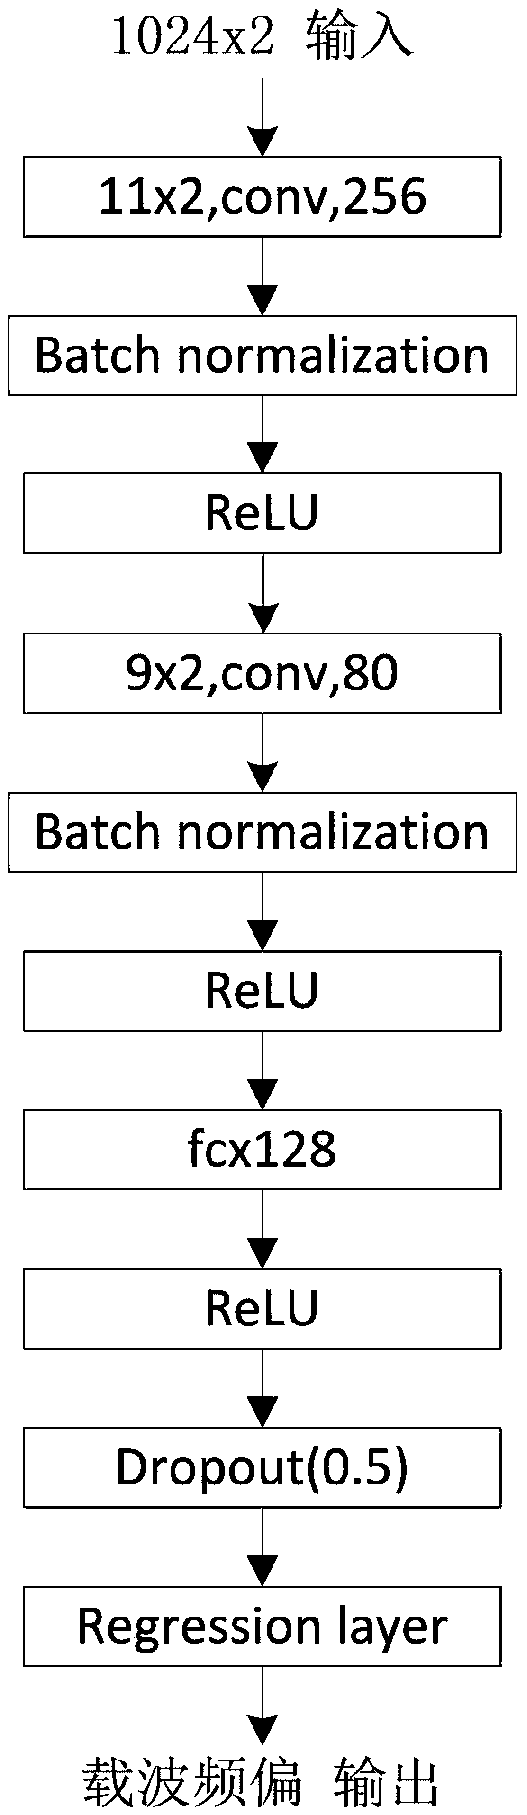 Carrier frequency offset estimation method based on convolution neural network